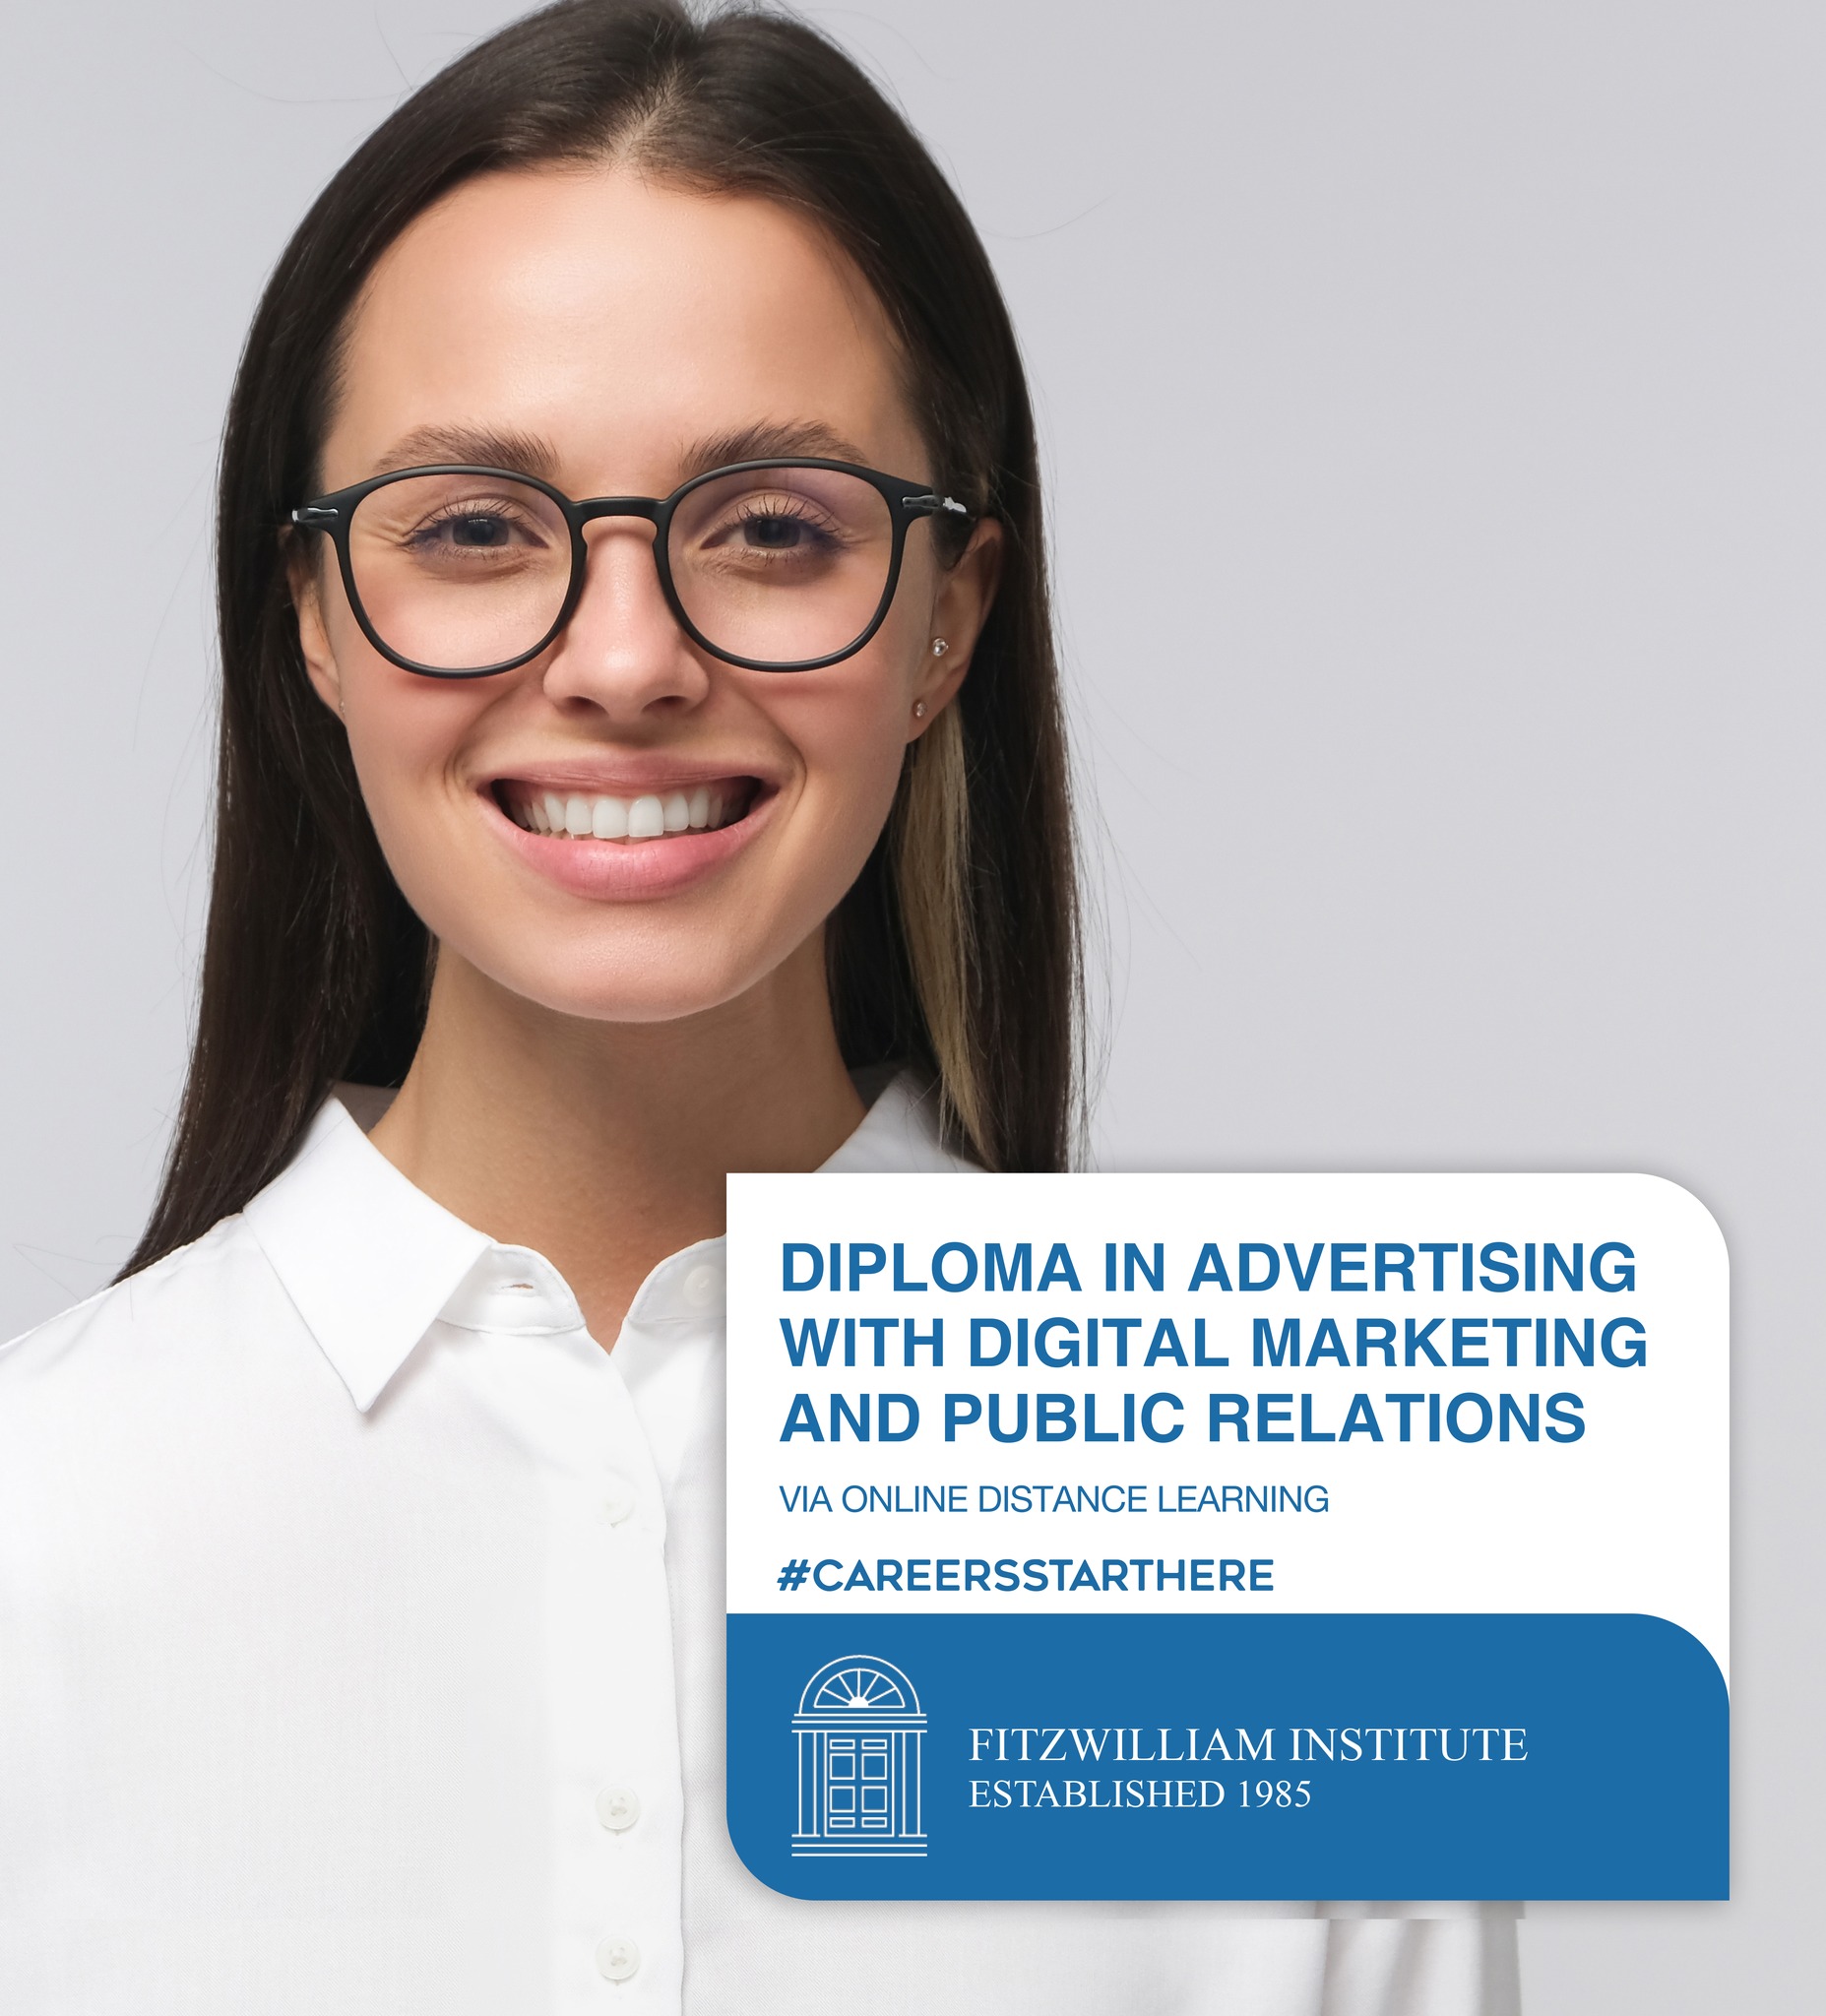 DIPLOMA-IN-ADVERTISING-WITH-DIGITAL-MARKETING-PUBLIC-RELATIONS.jpg